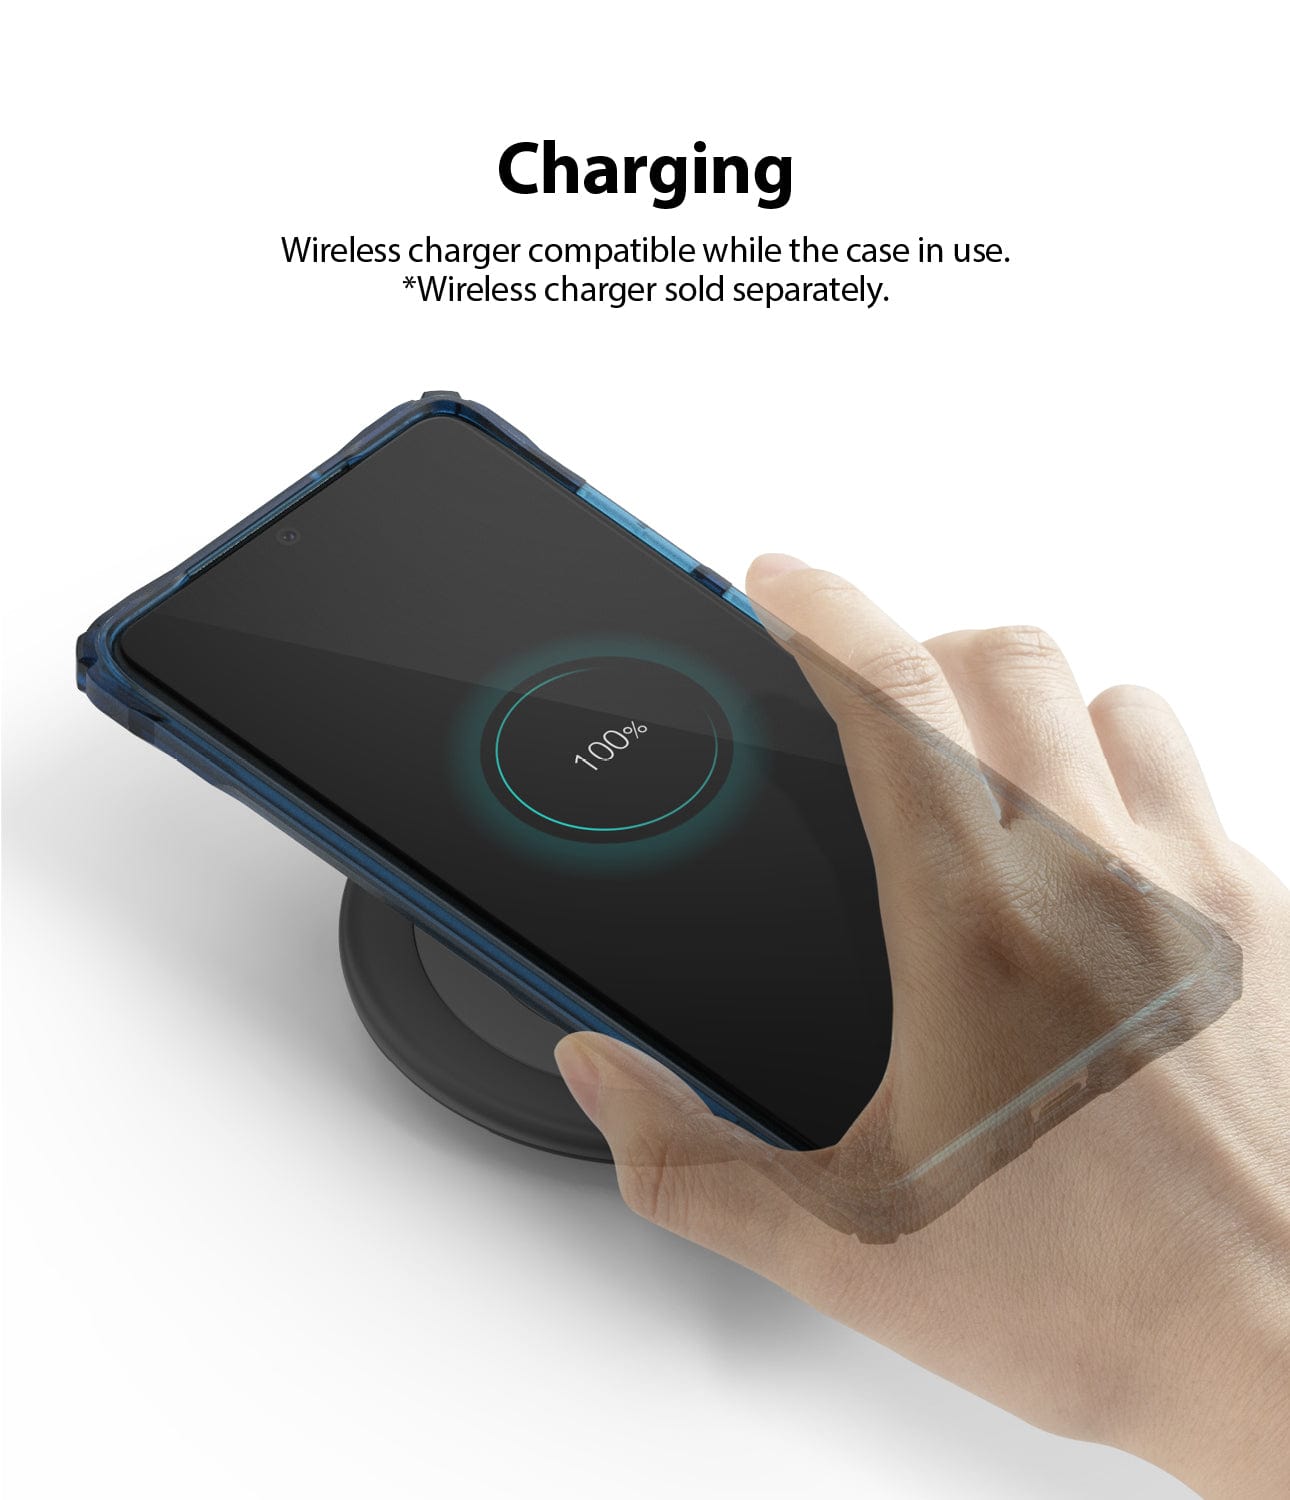 Supports Wireless Charging and PowerShare